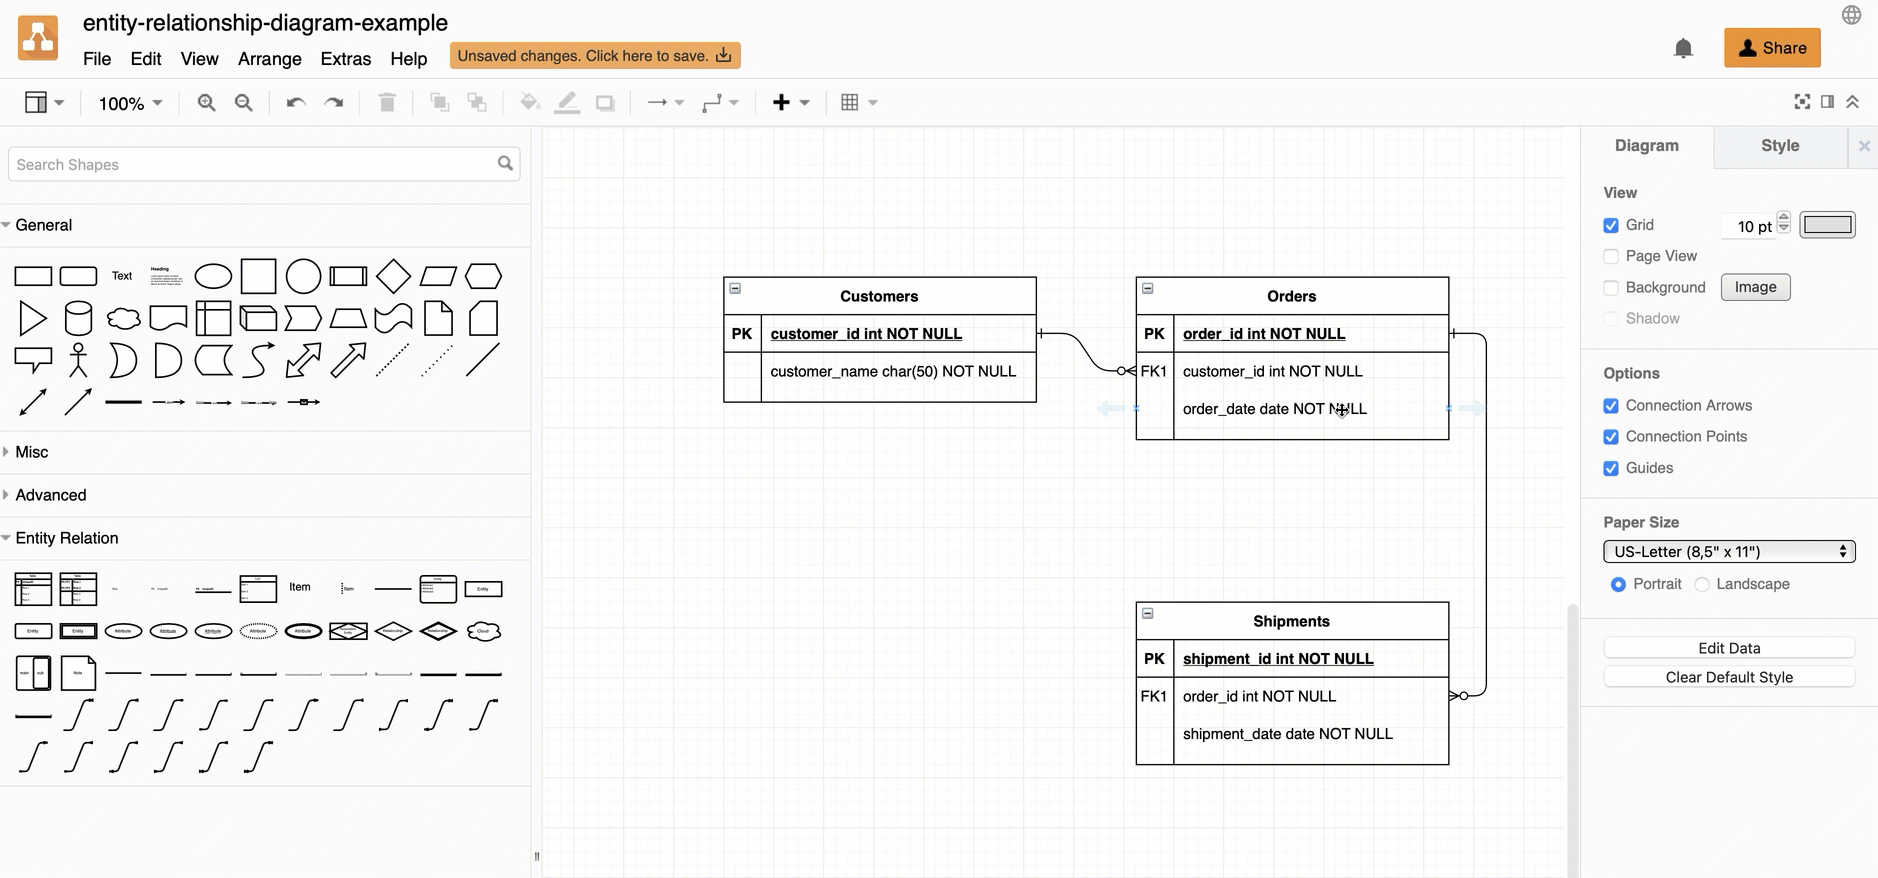 Add new rows to entity tables in an ER model in diagrams.net many different ways